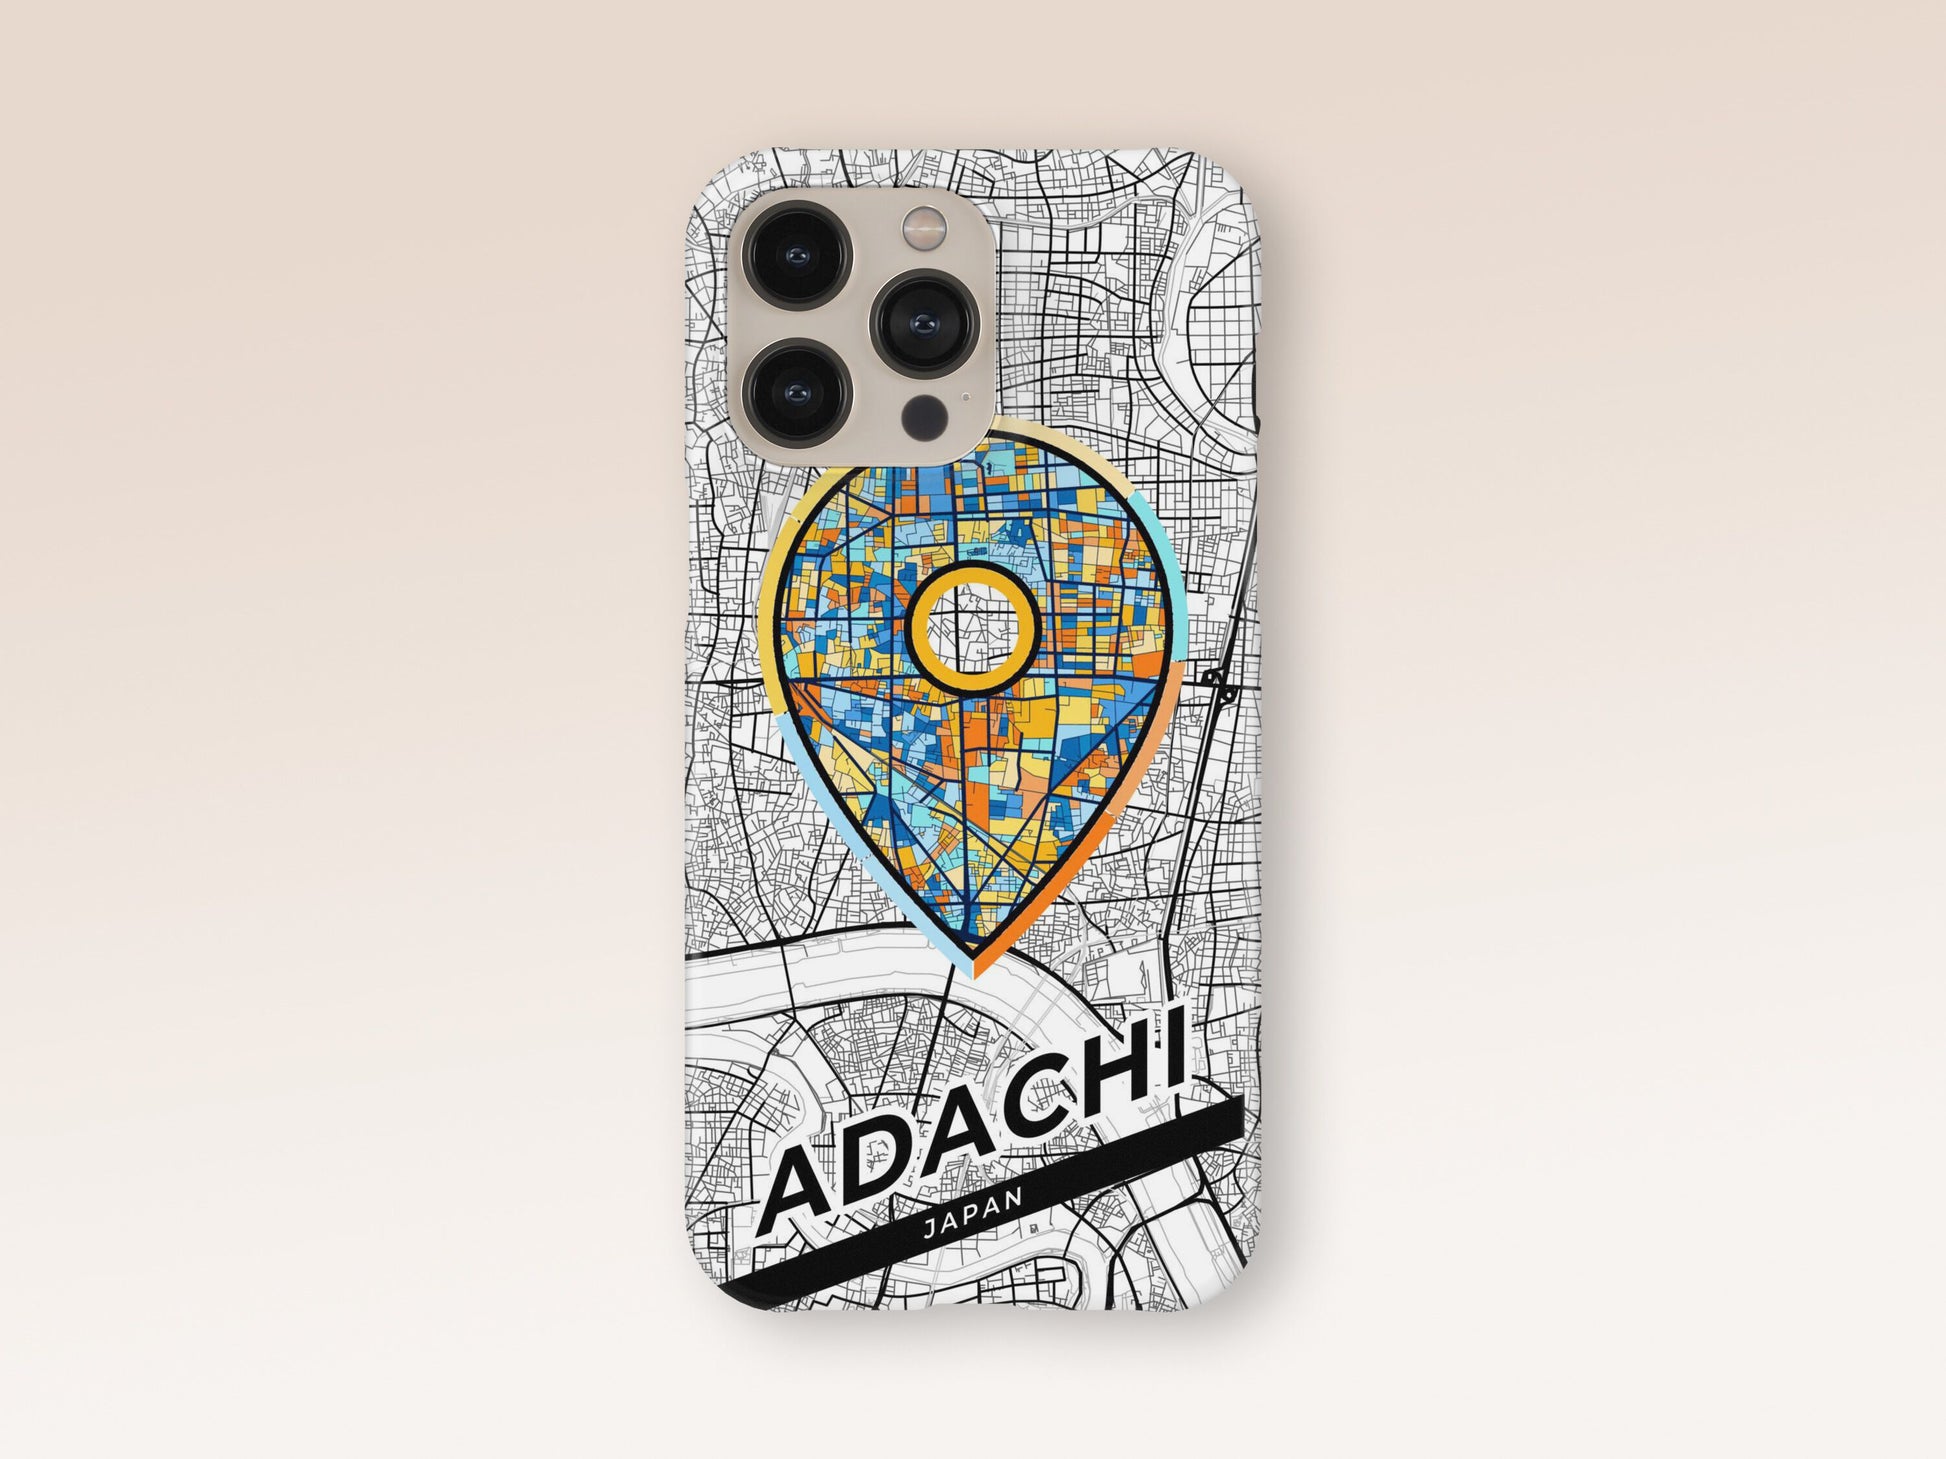 Adachi Japan slim phone case with colorful icon. Birthday, wedding or housewarming gift. Couple match cases. 1